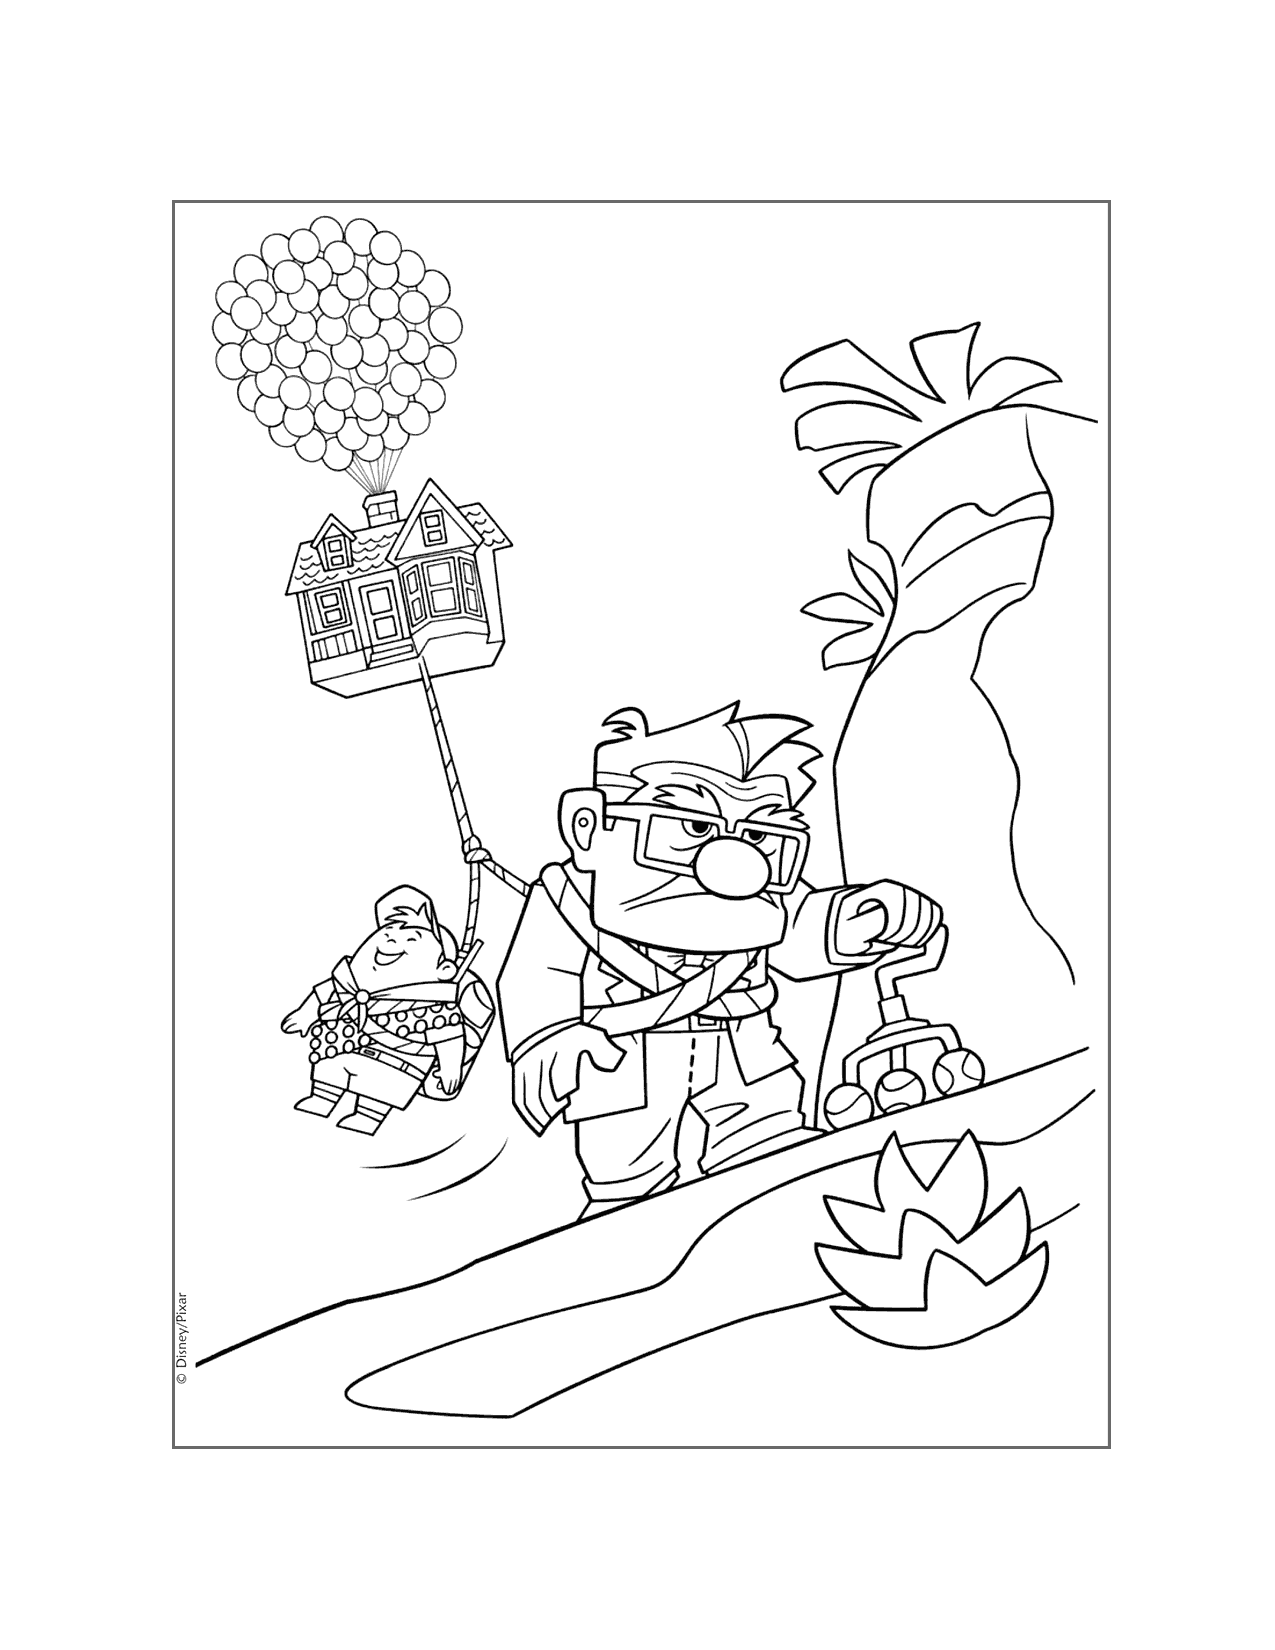 Carl Tows Russell And His House Up Coloring Page